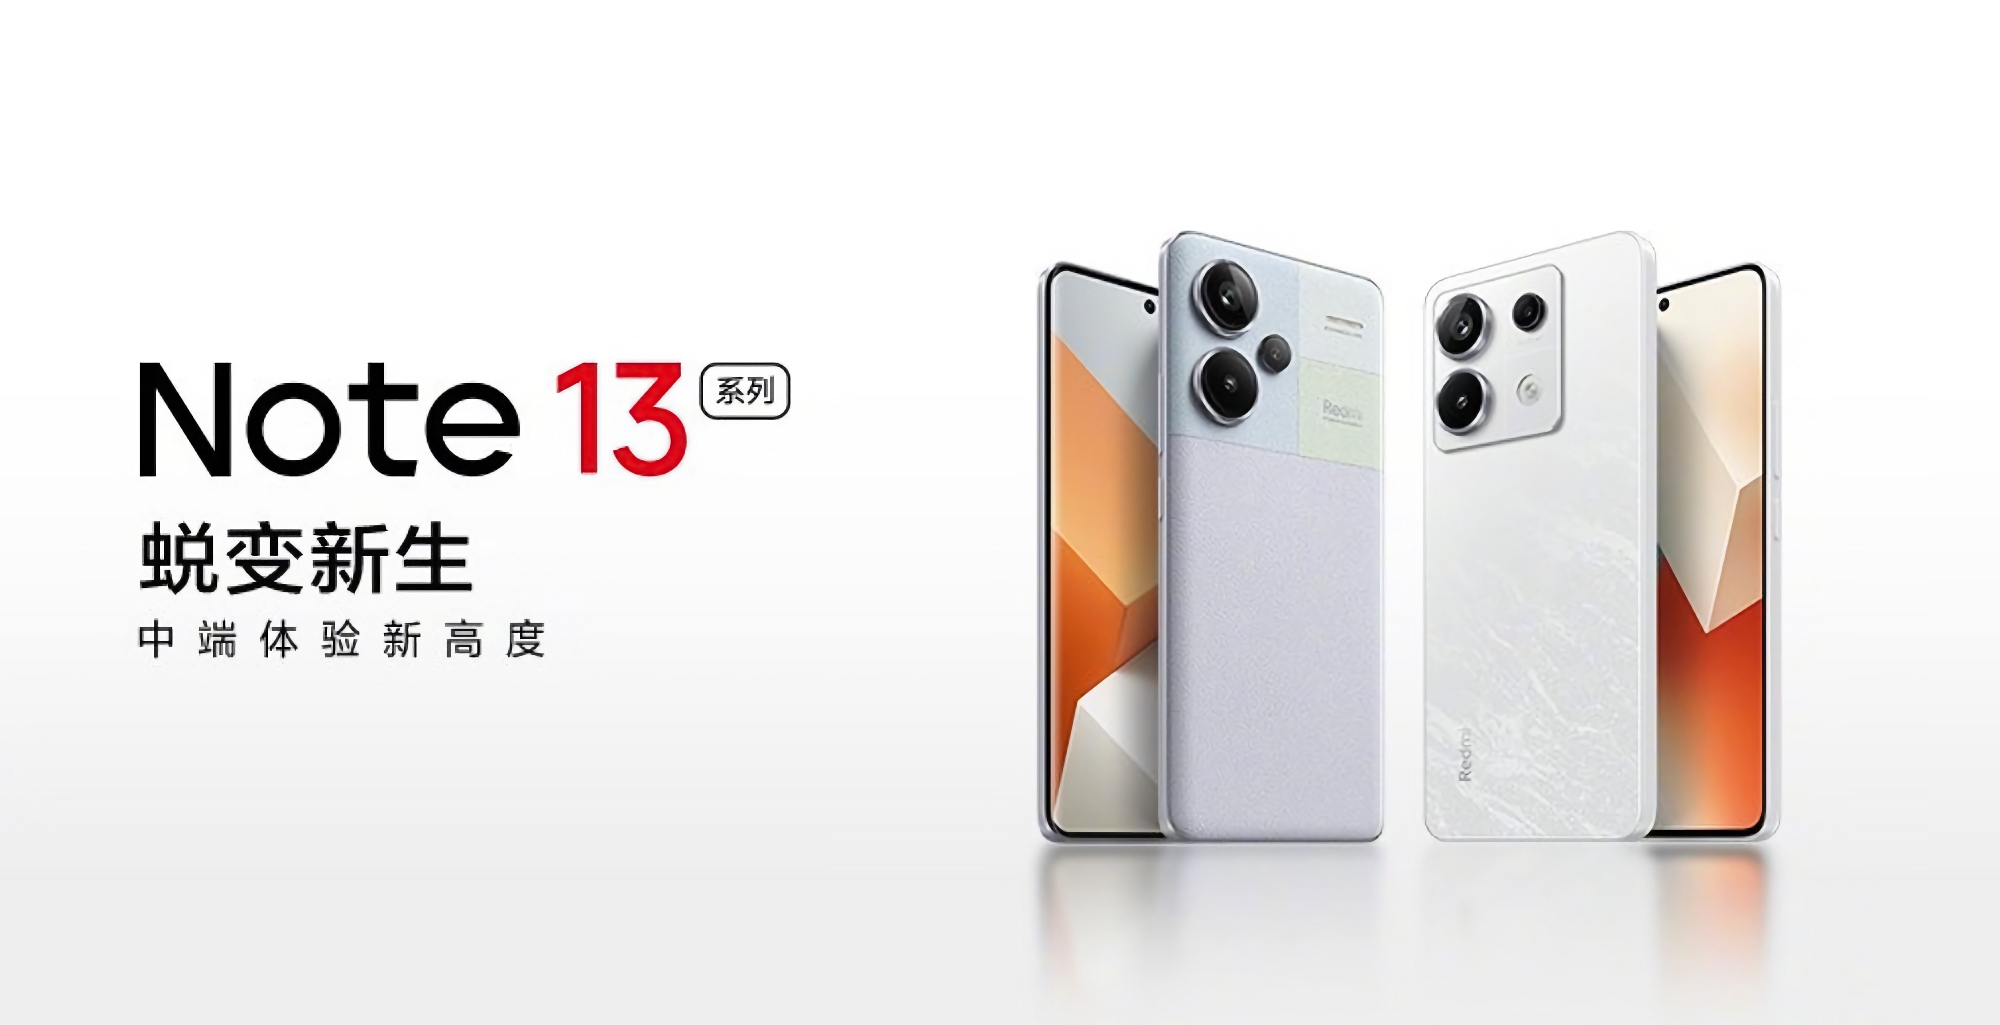 It's official: Xiaomi will unveil the Redmi Note 13 smartphone lineup on September 21